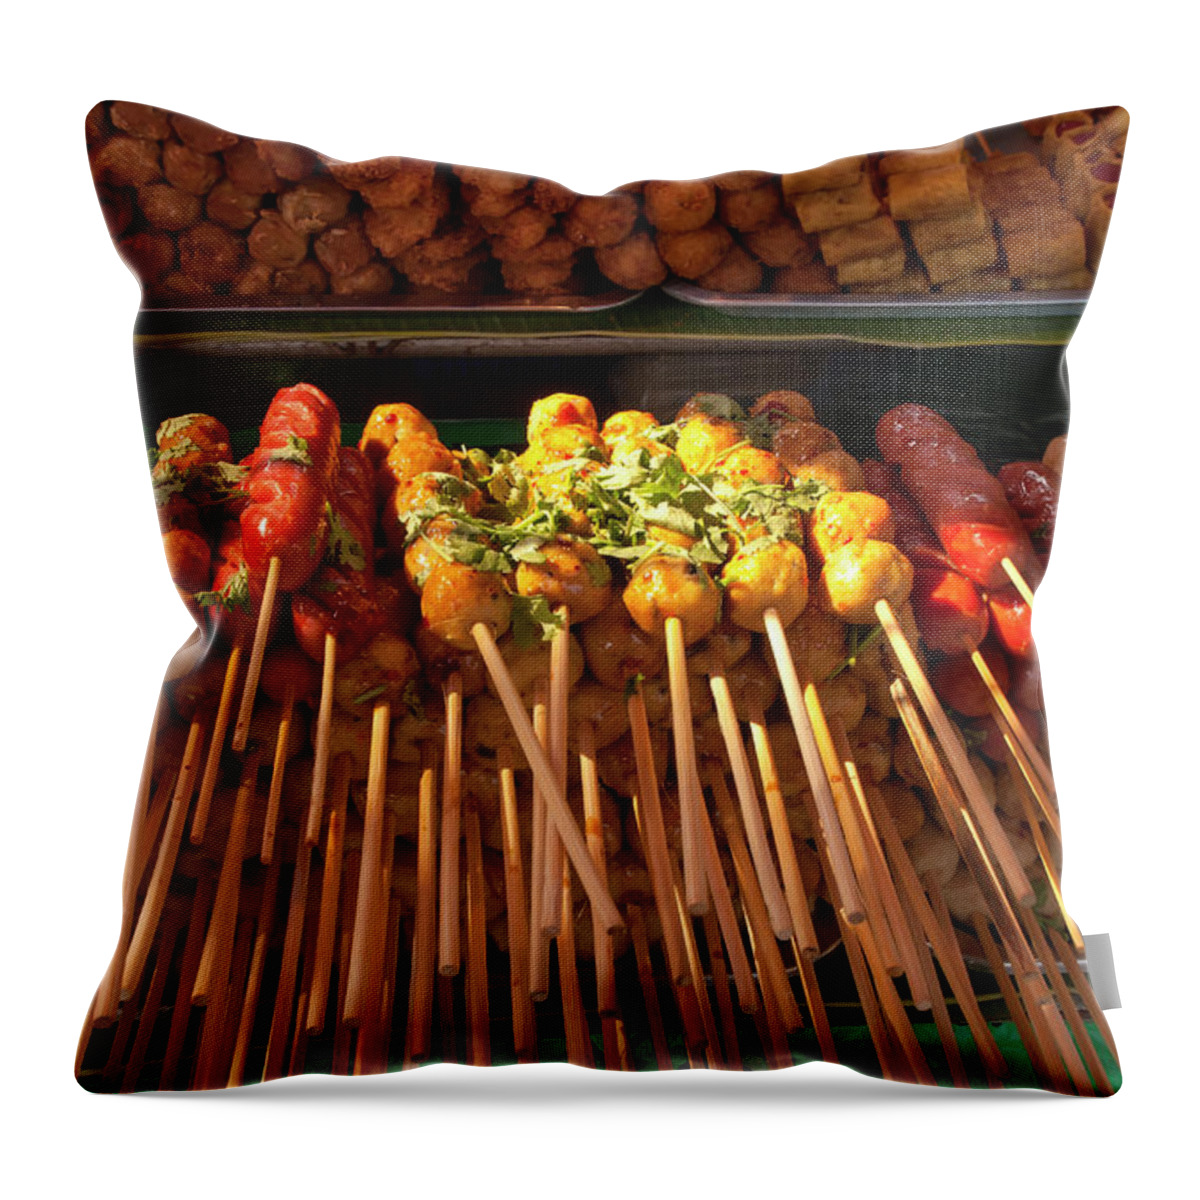 Heap Throw Pillow featuring the photograph Thailand Skewers Of Grilled Meats by M Timothy O'keefe